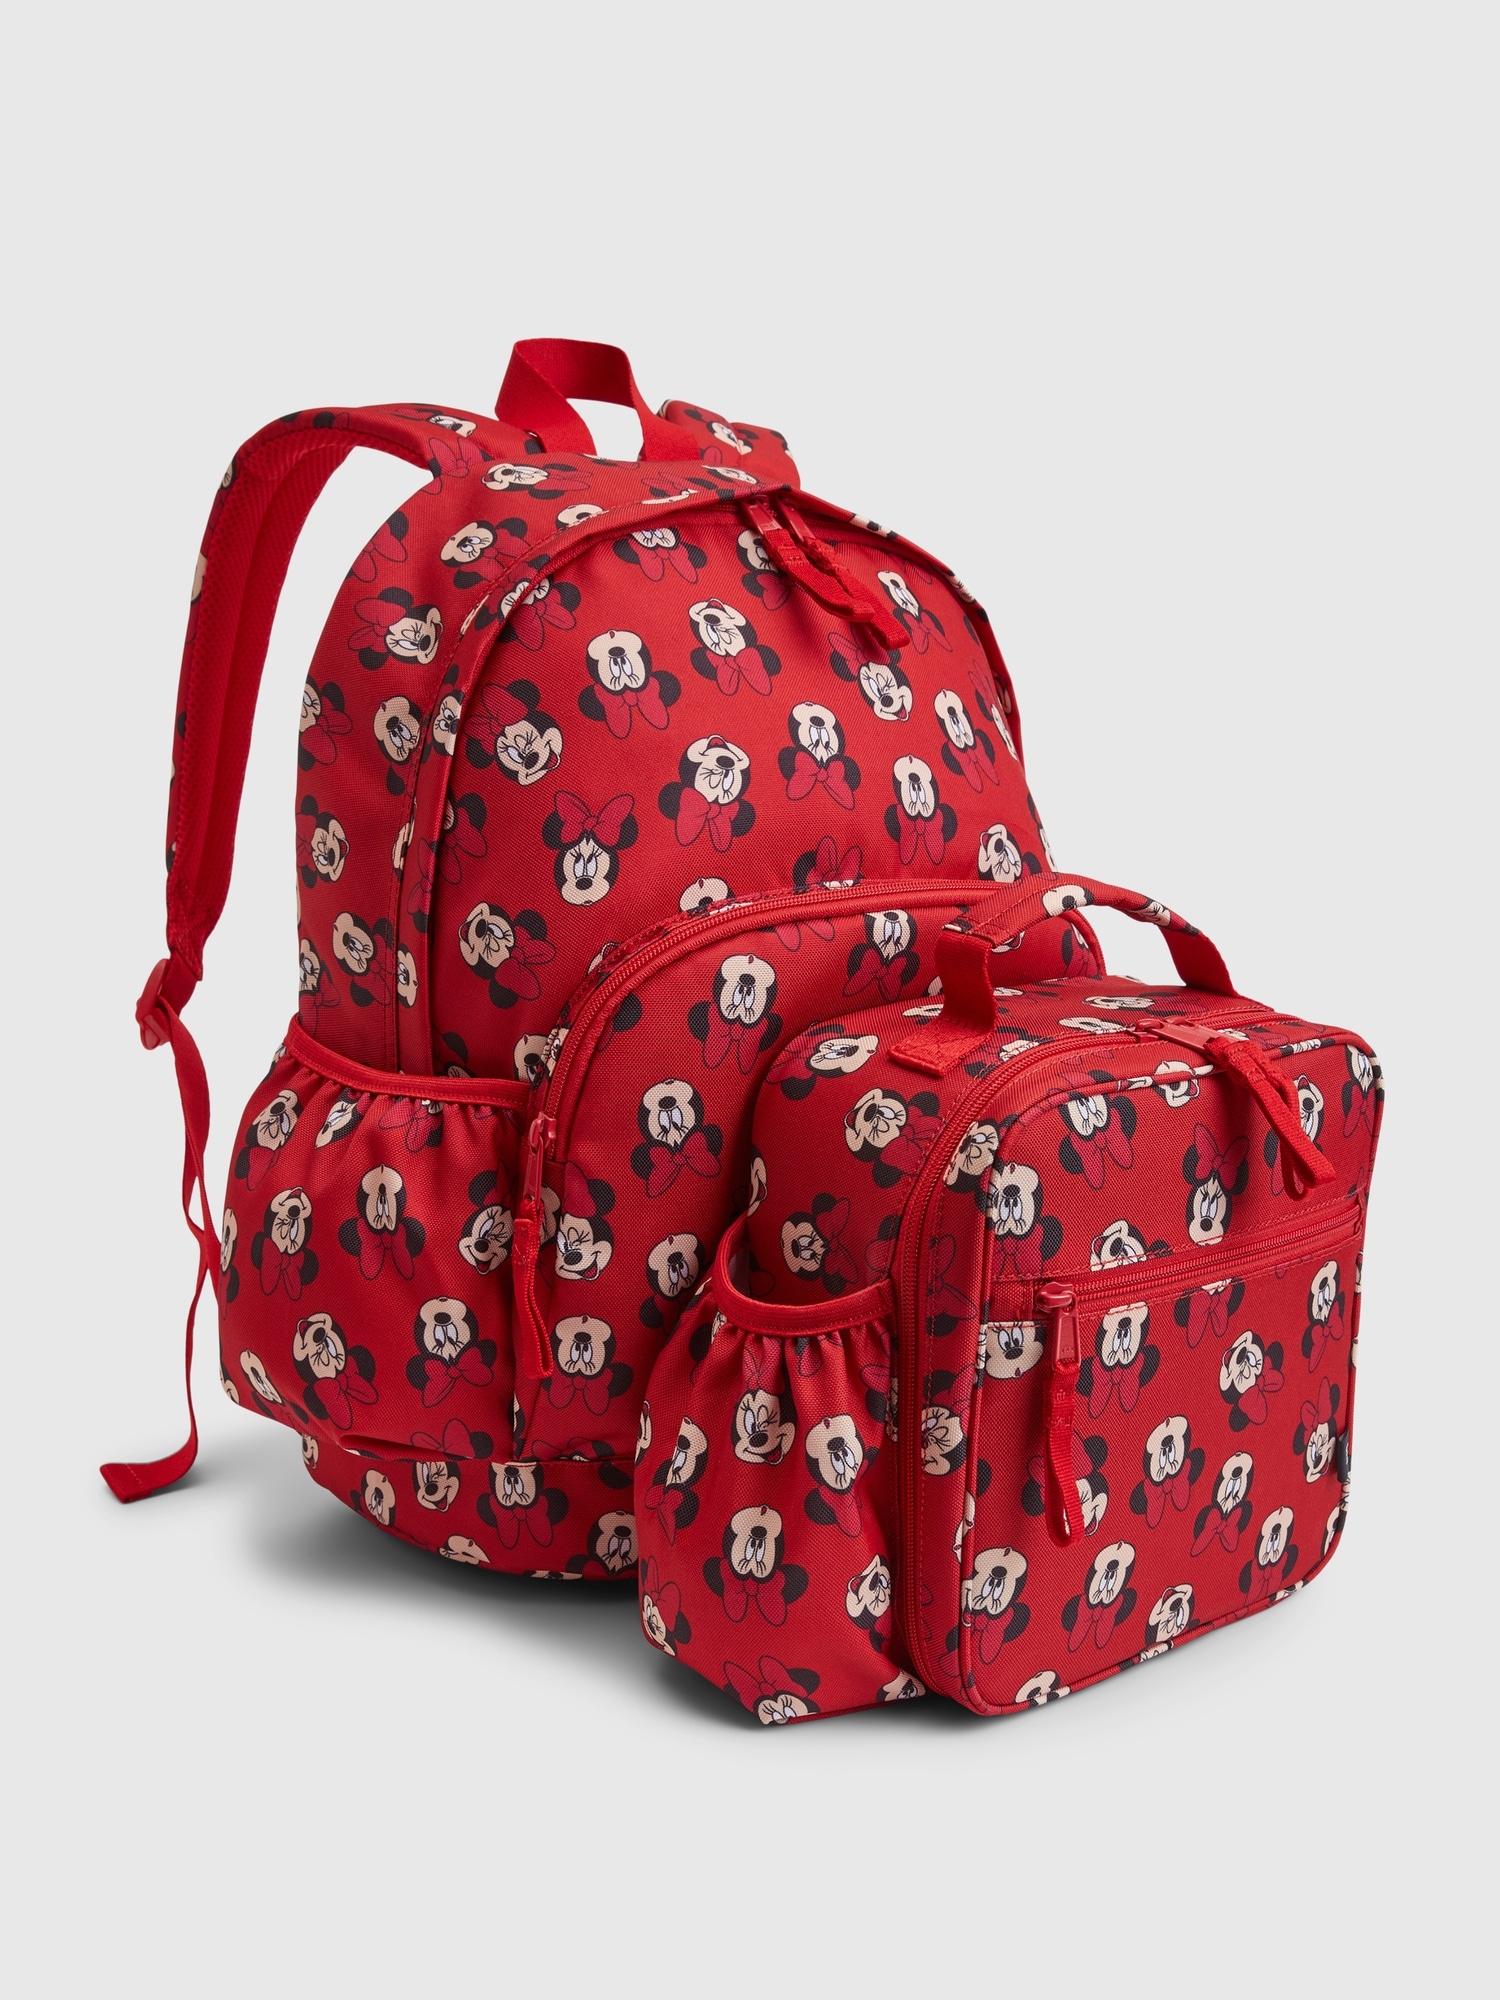 GapKids | Disney Recycled Minnie Mouse Backpack | Gap